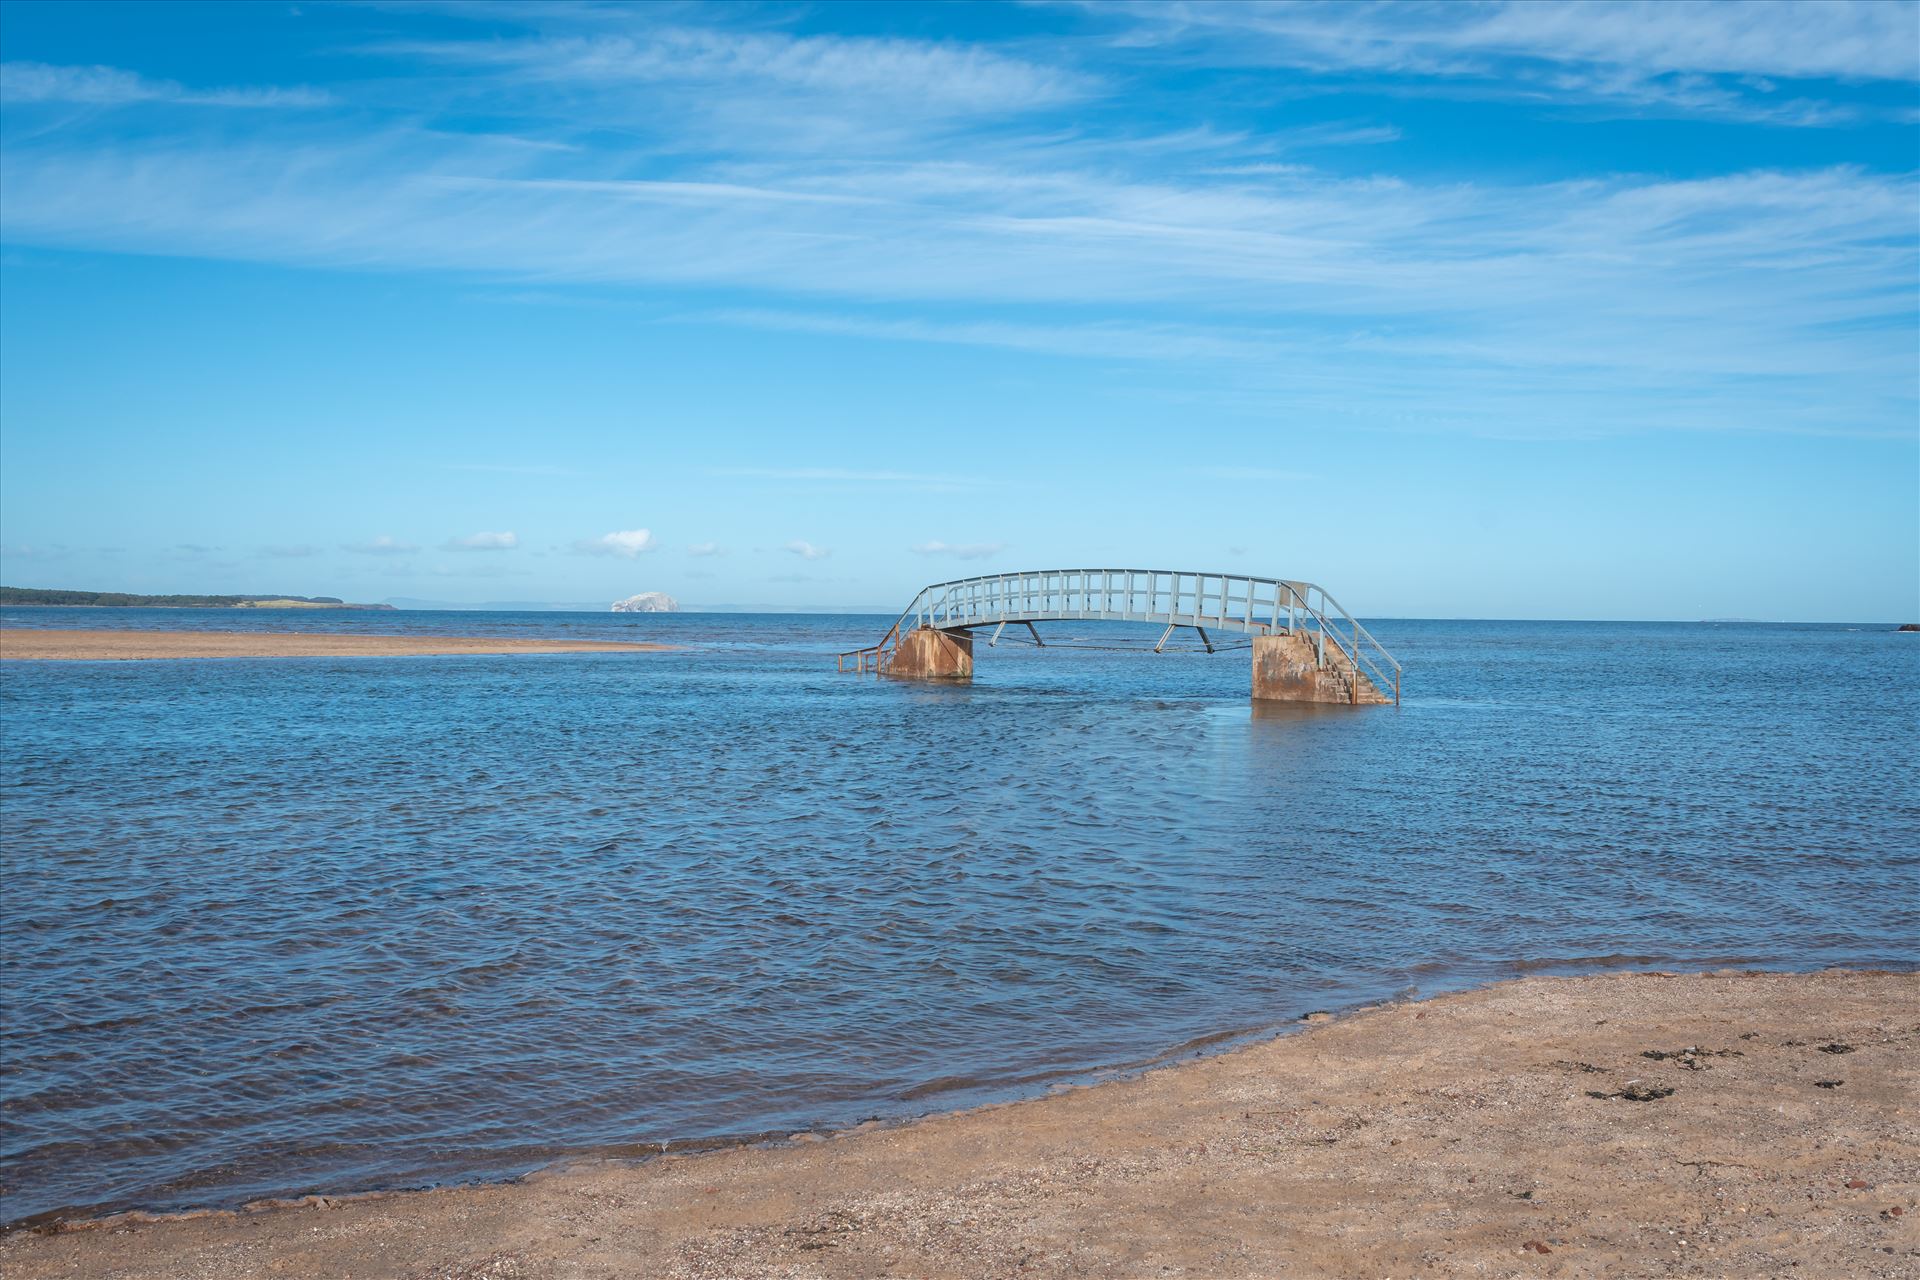 'Bridge to Nowhere’, Dunbar, ScotlandWhen the tide comes surging into shore, what should be an easy path to the beach becomes suddenly impassable. At high tide, the water swallows the land around the bridge, making it look as though it’s stranded in the middle of a sea.